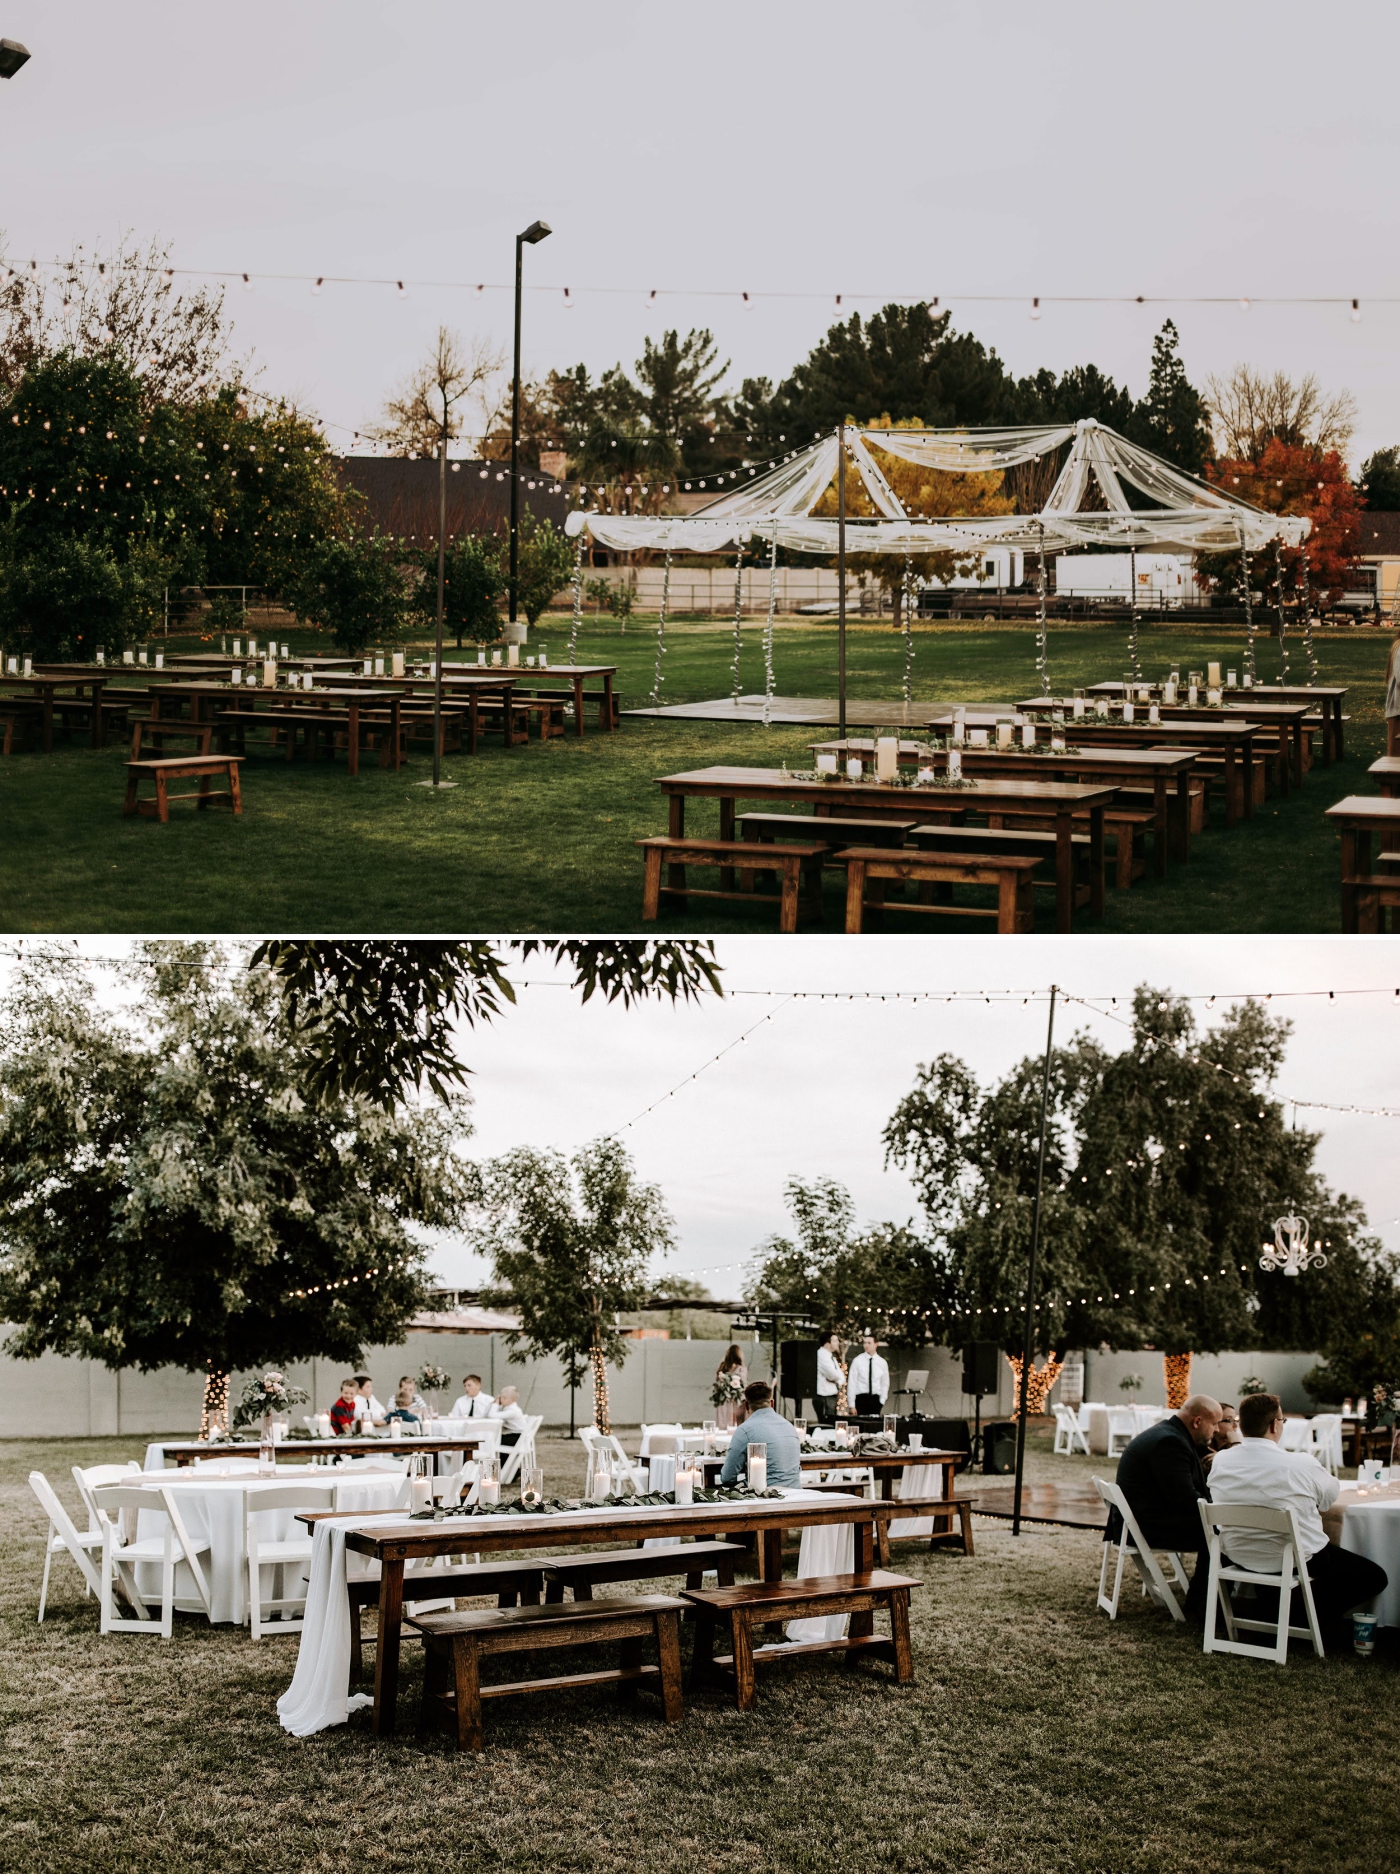 Rustic event rentals from Wood n Crate